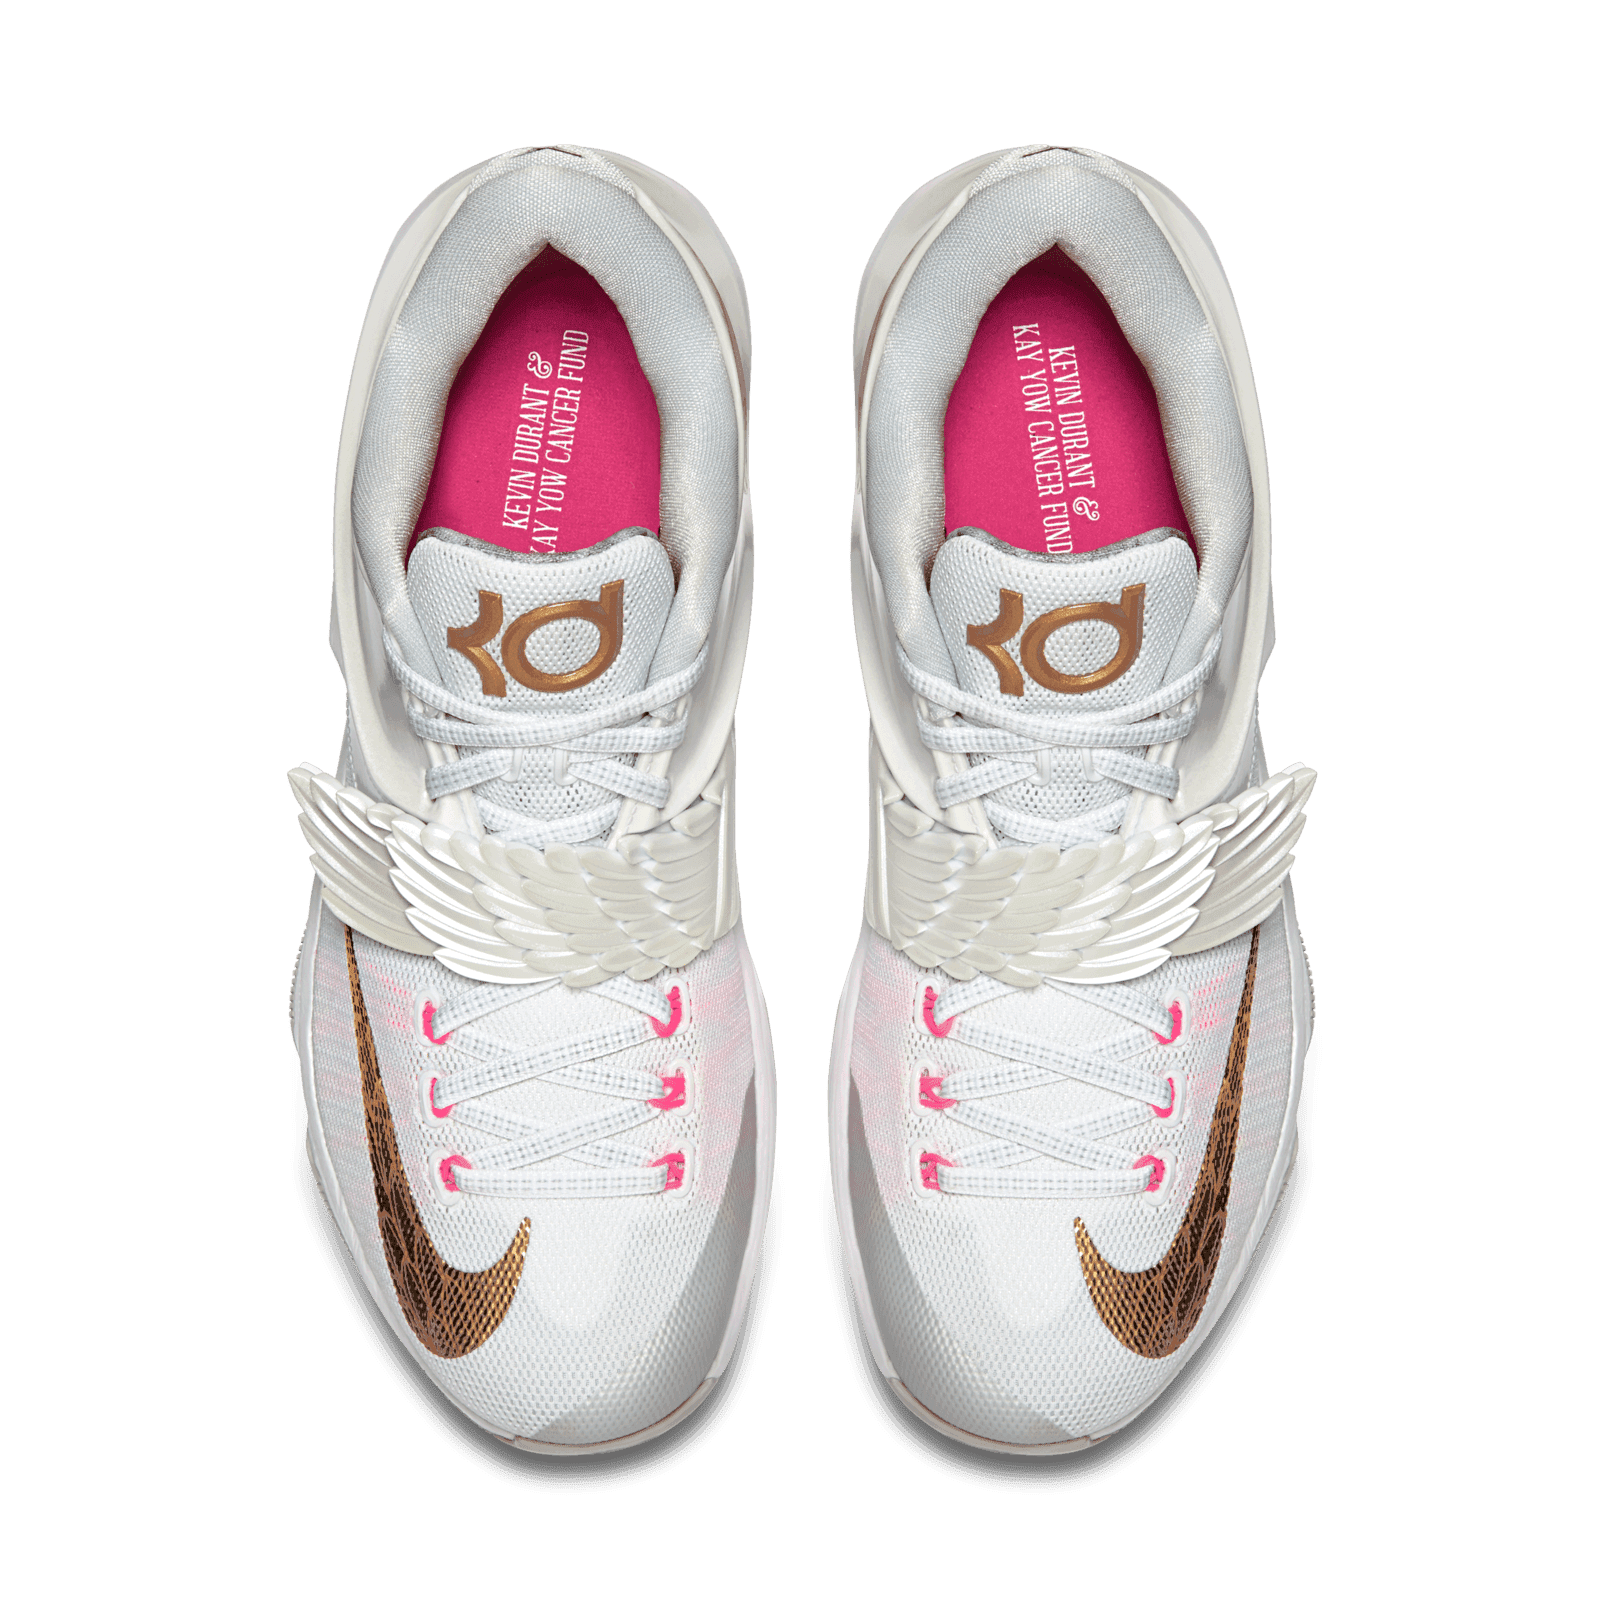 Nike KD 7 Aunt Pearl - 706858-176 Raffles and Release Date